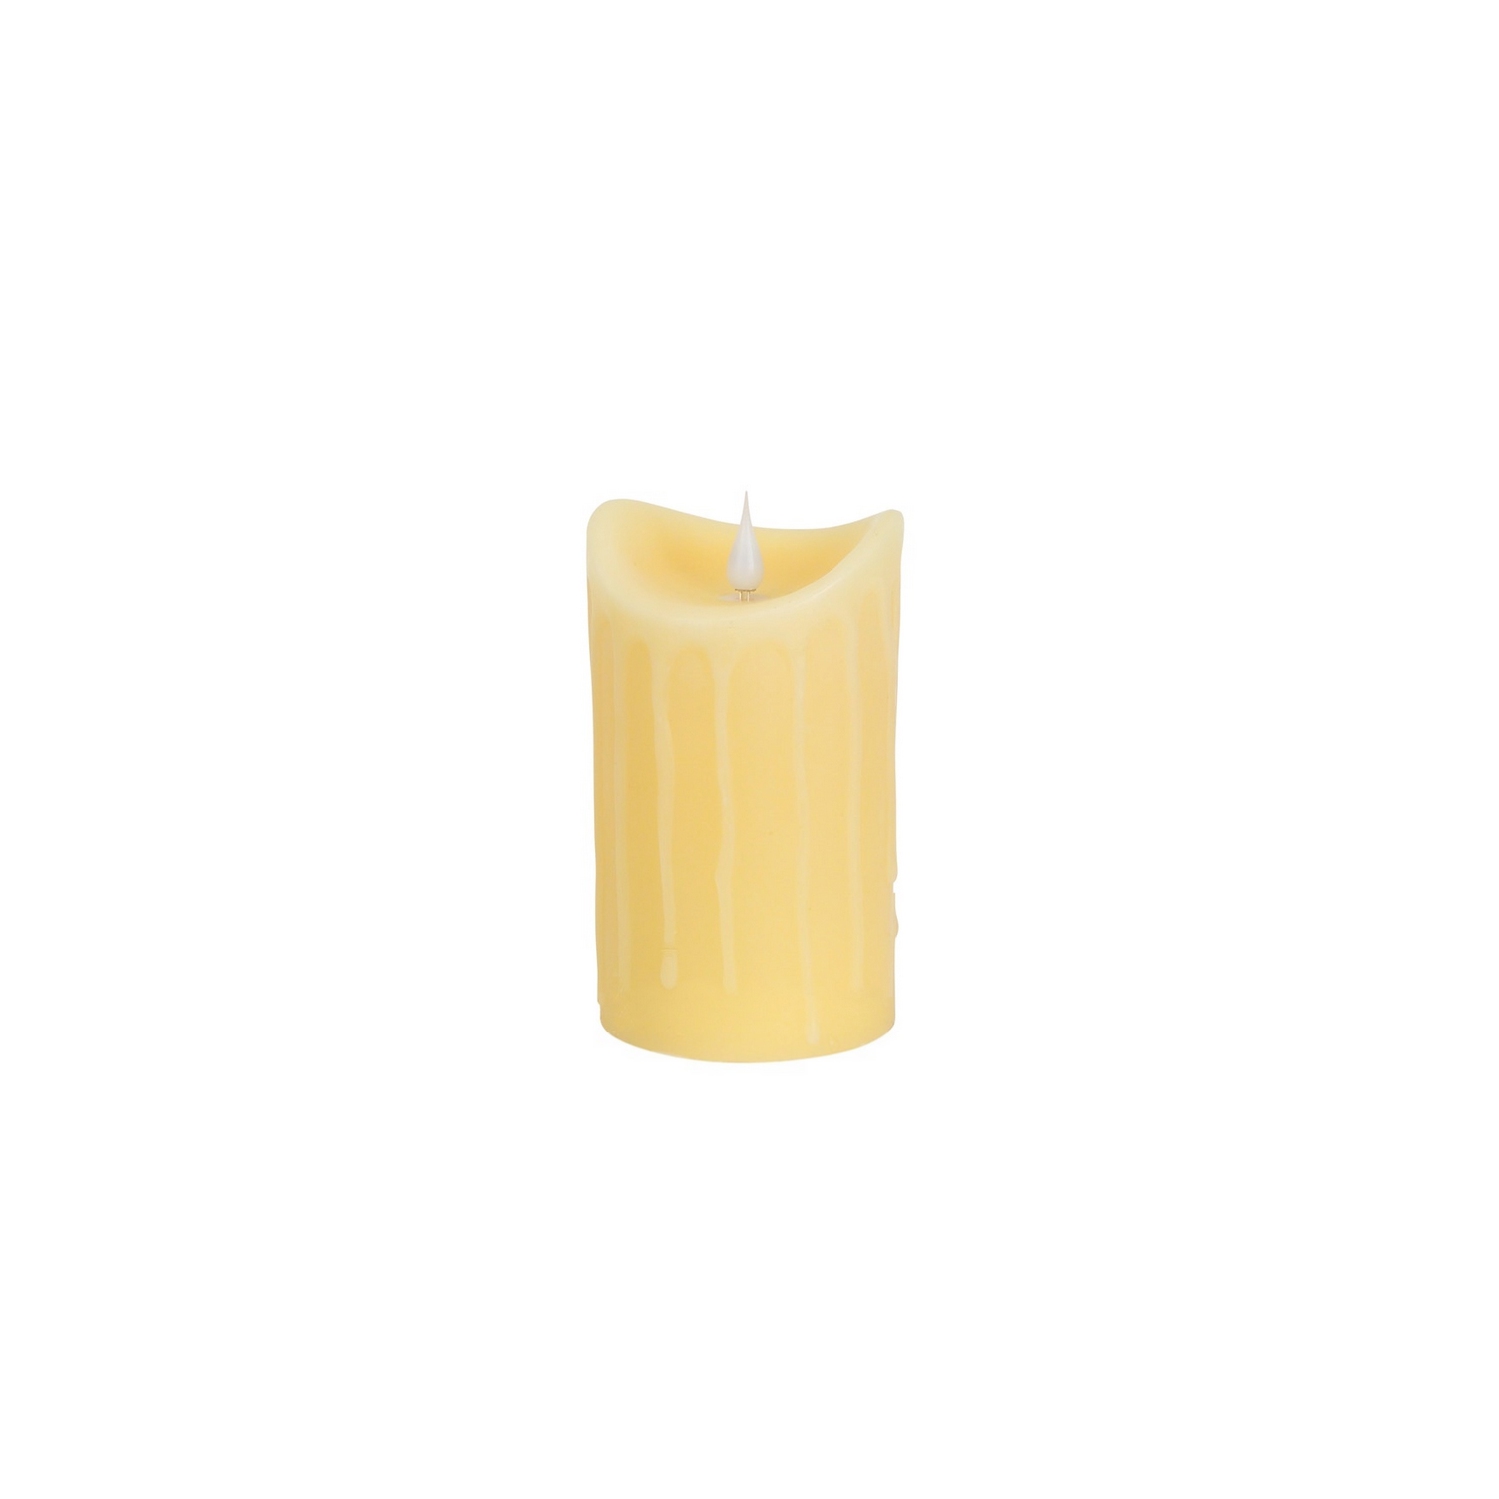 5" Pre-Lit Ivory Battery Operated Flameless LED Pillar Candle